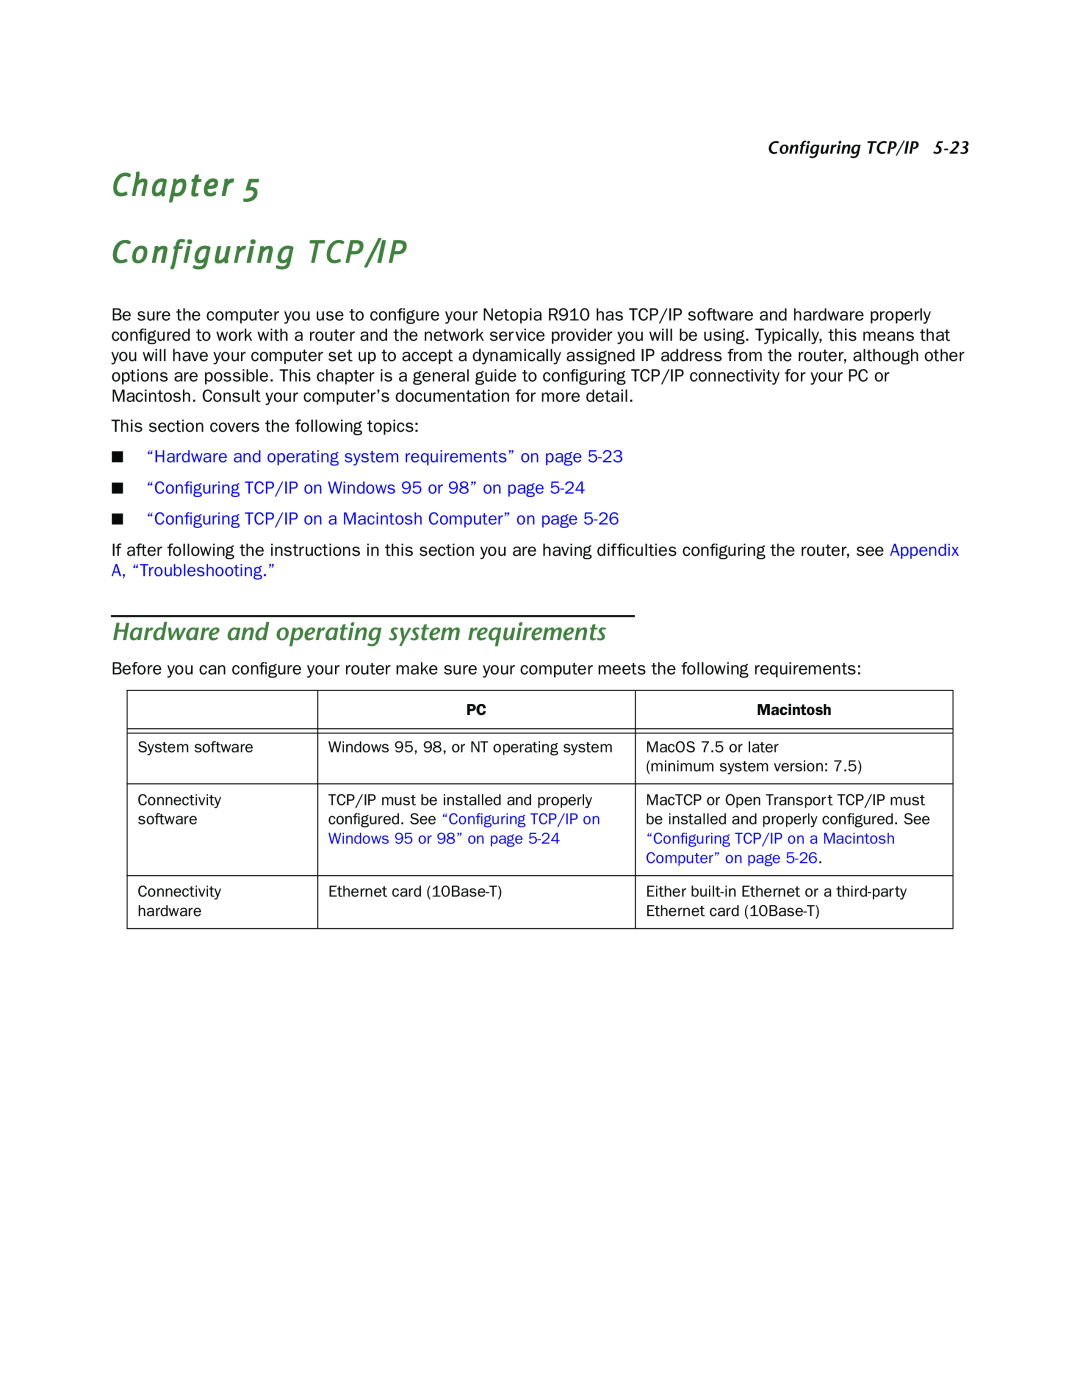 Netopia R910 manual Chapter Configuring TCP/IP, Hardware and operating system requirements, Conﬁguring TCP/IP 